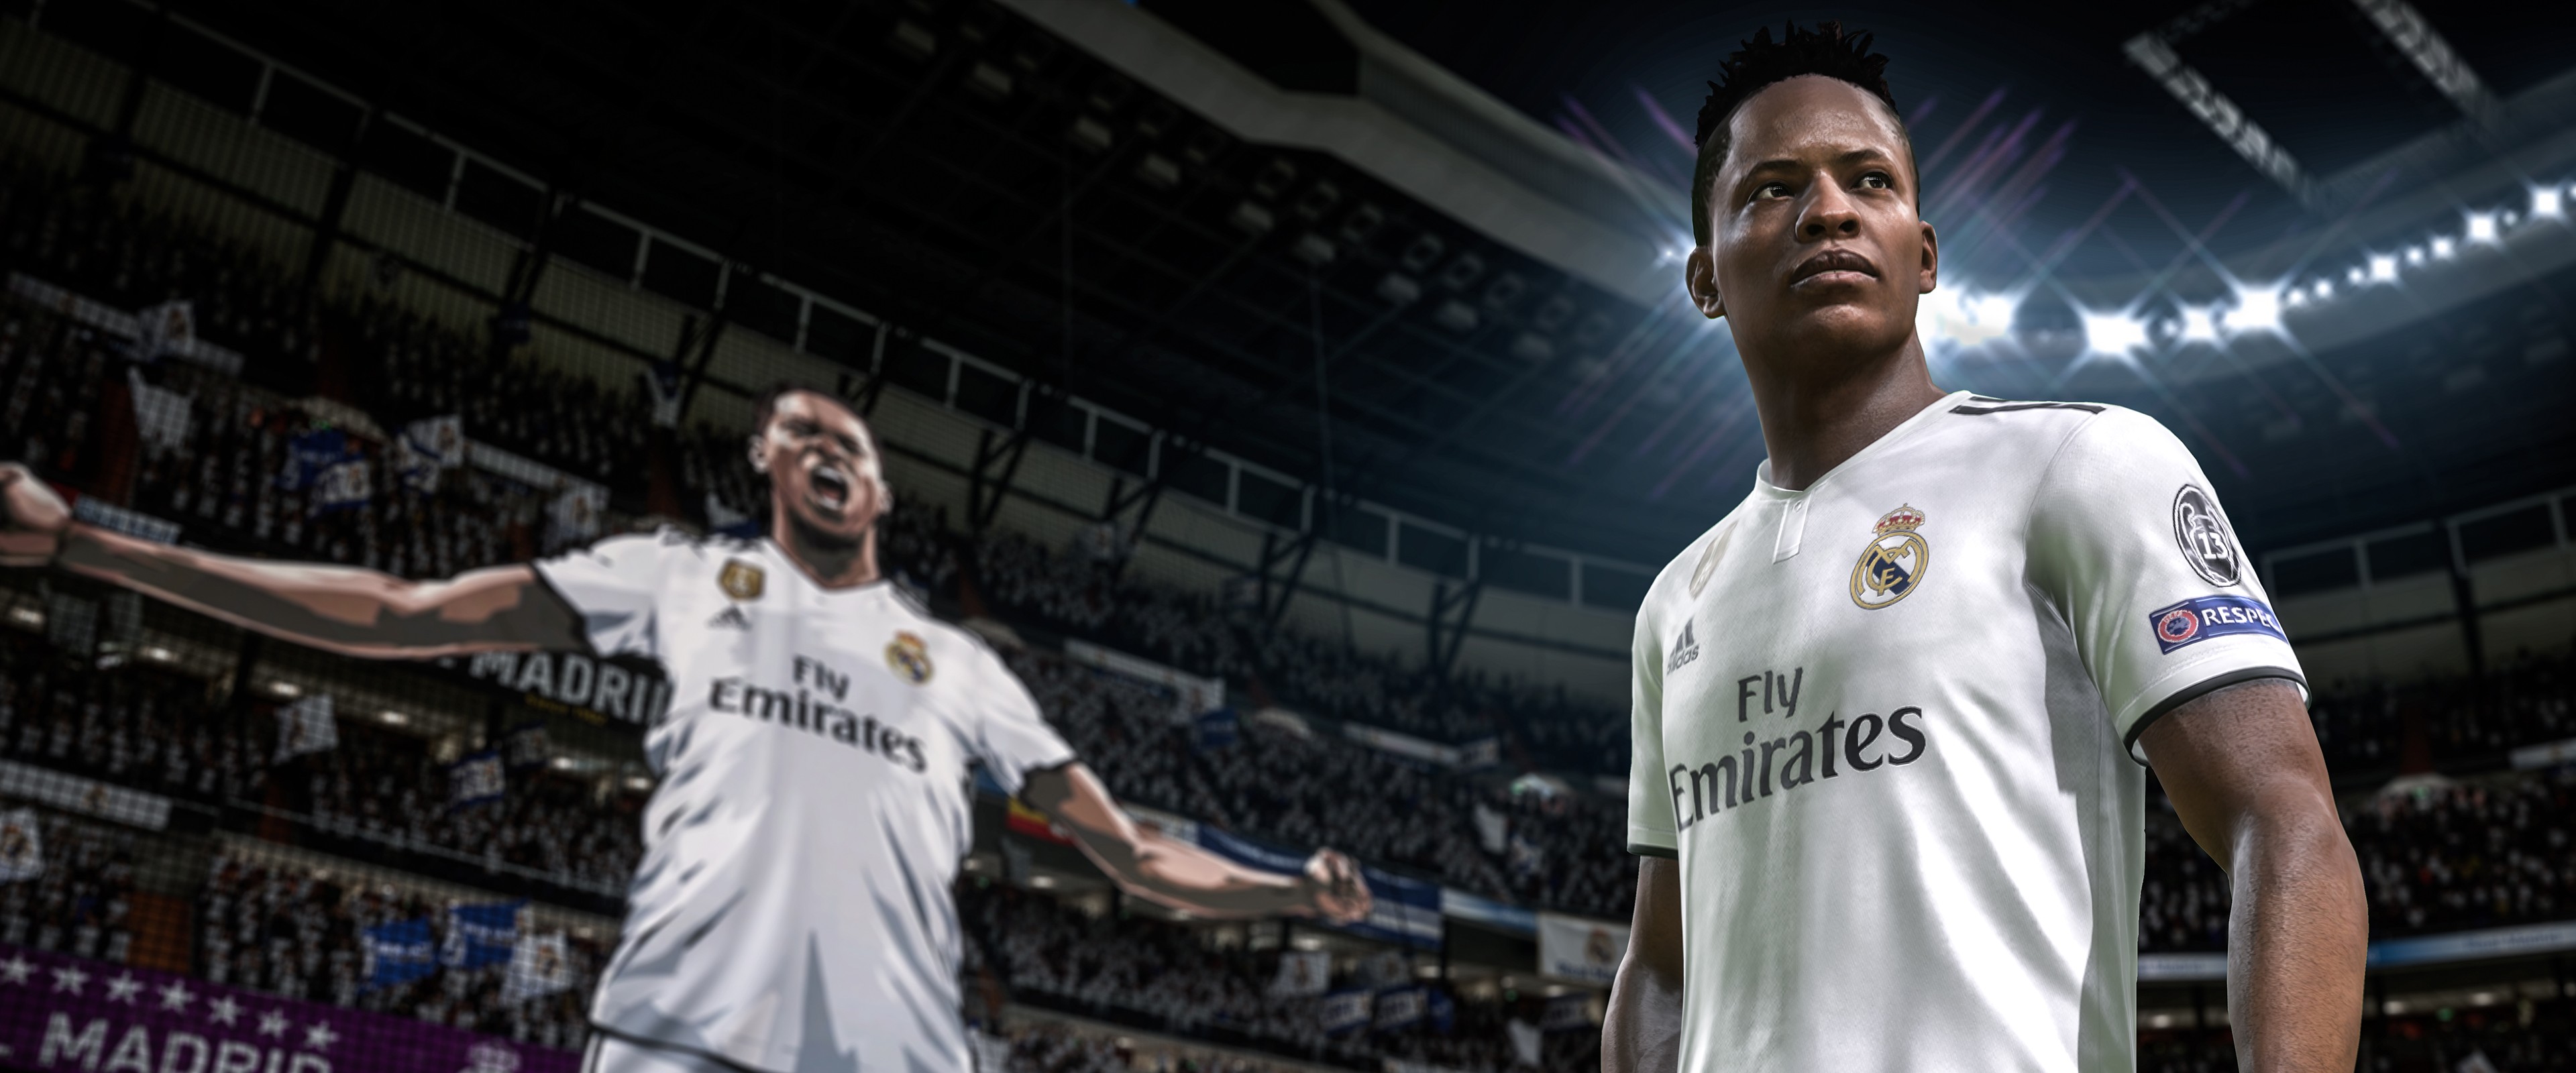 Download game fifa 2017 pc